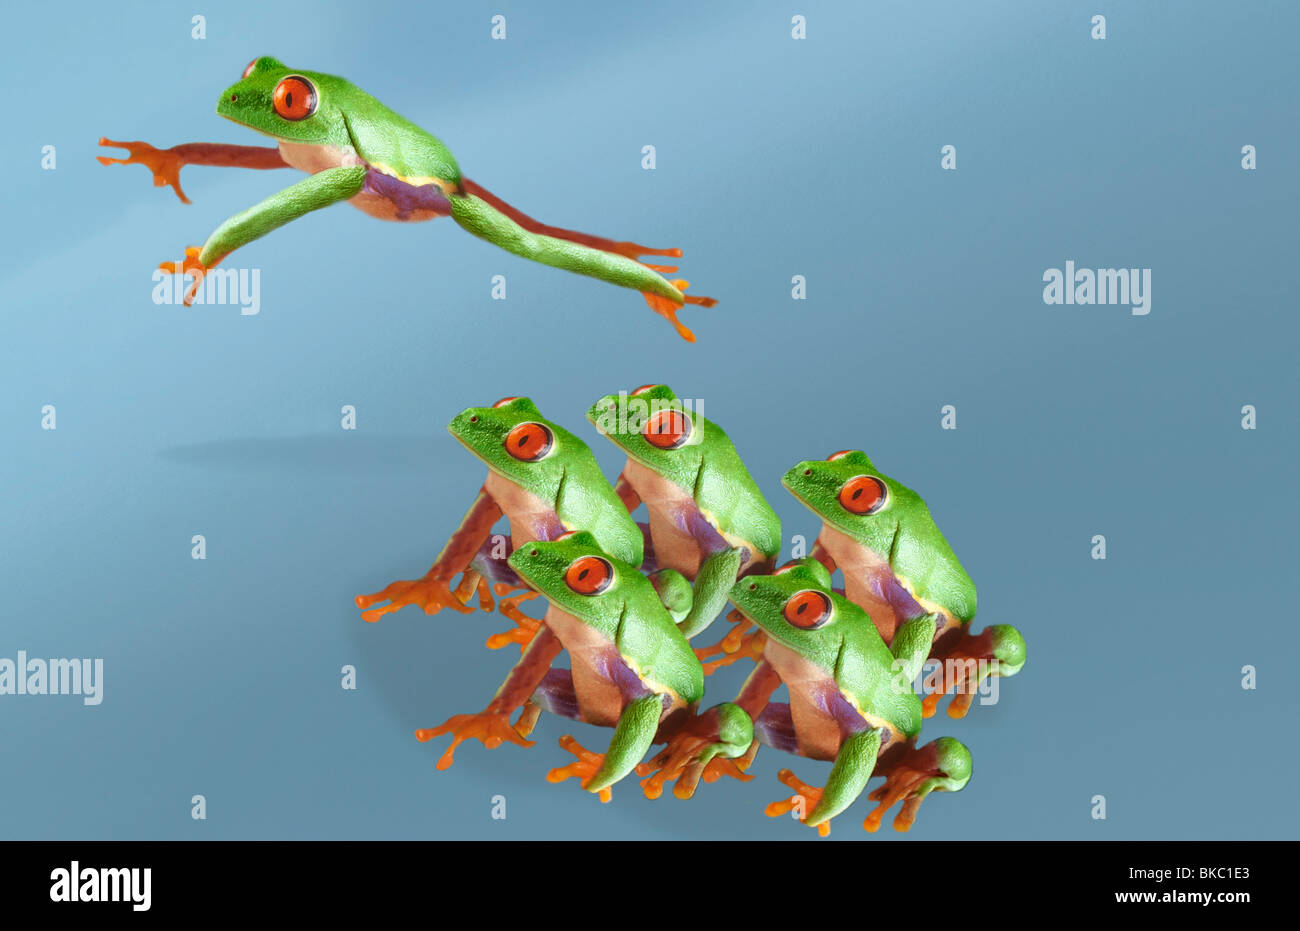 Frogs playing leapfrog Stock Photo